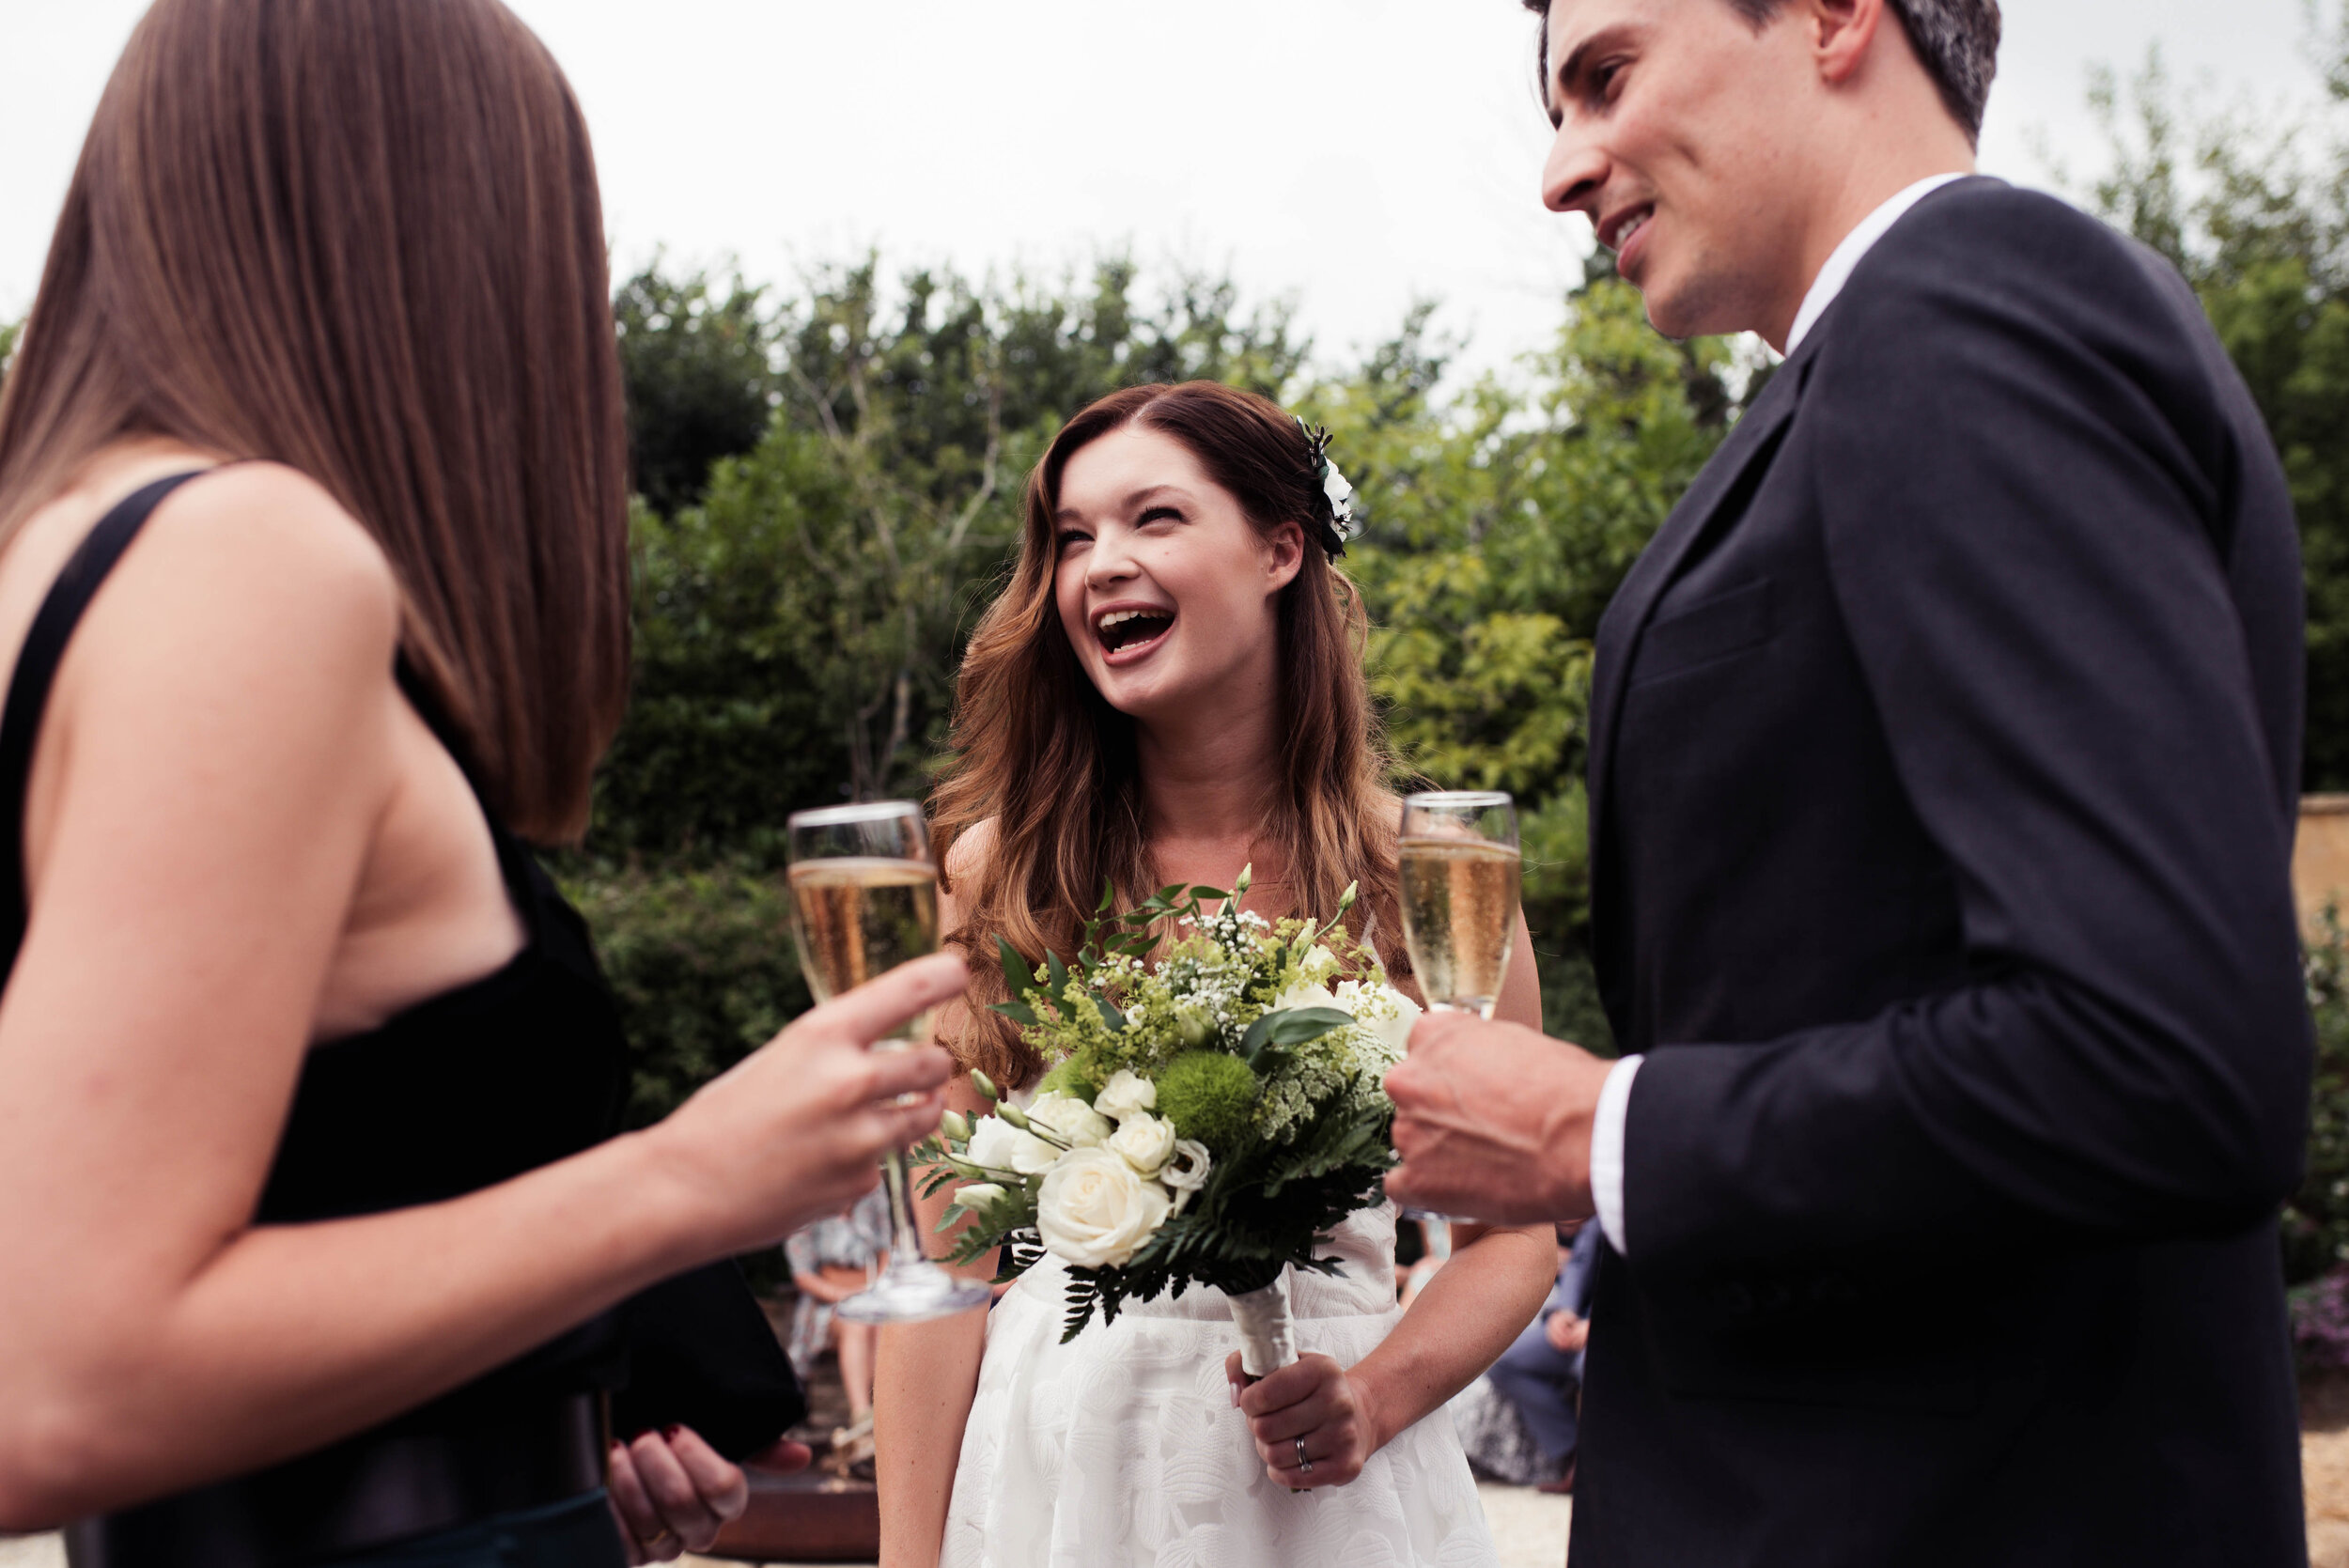 The bride shares a beaming laugh with two other wedding guests